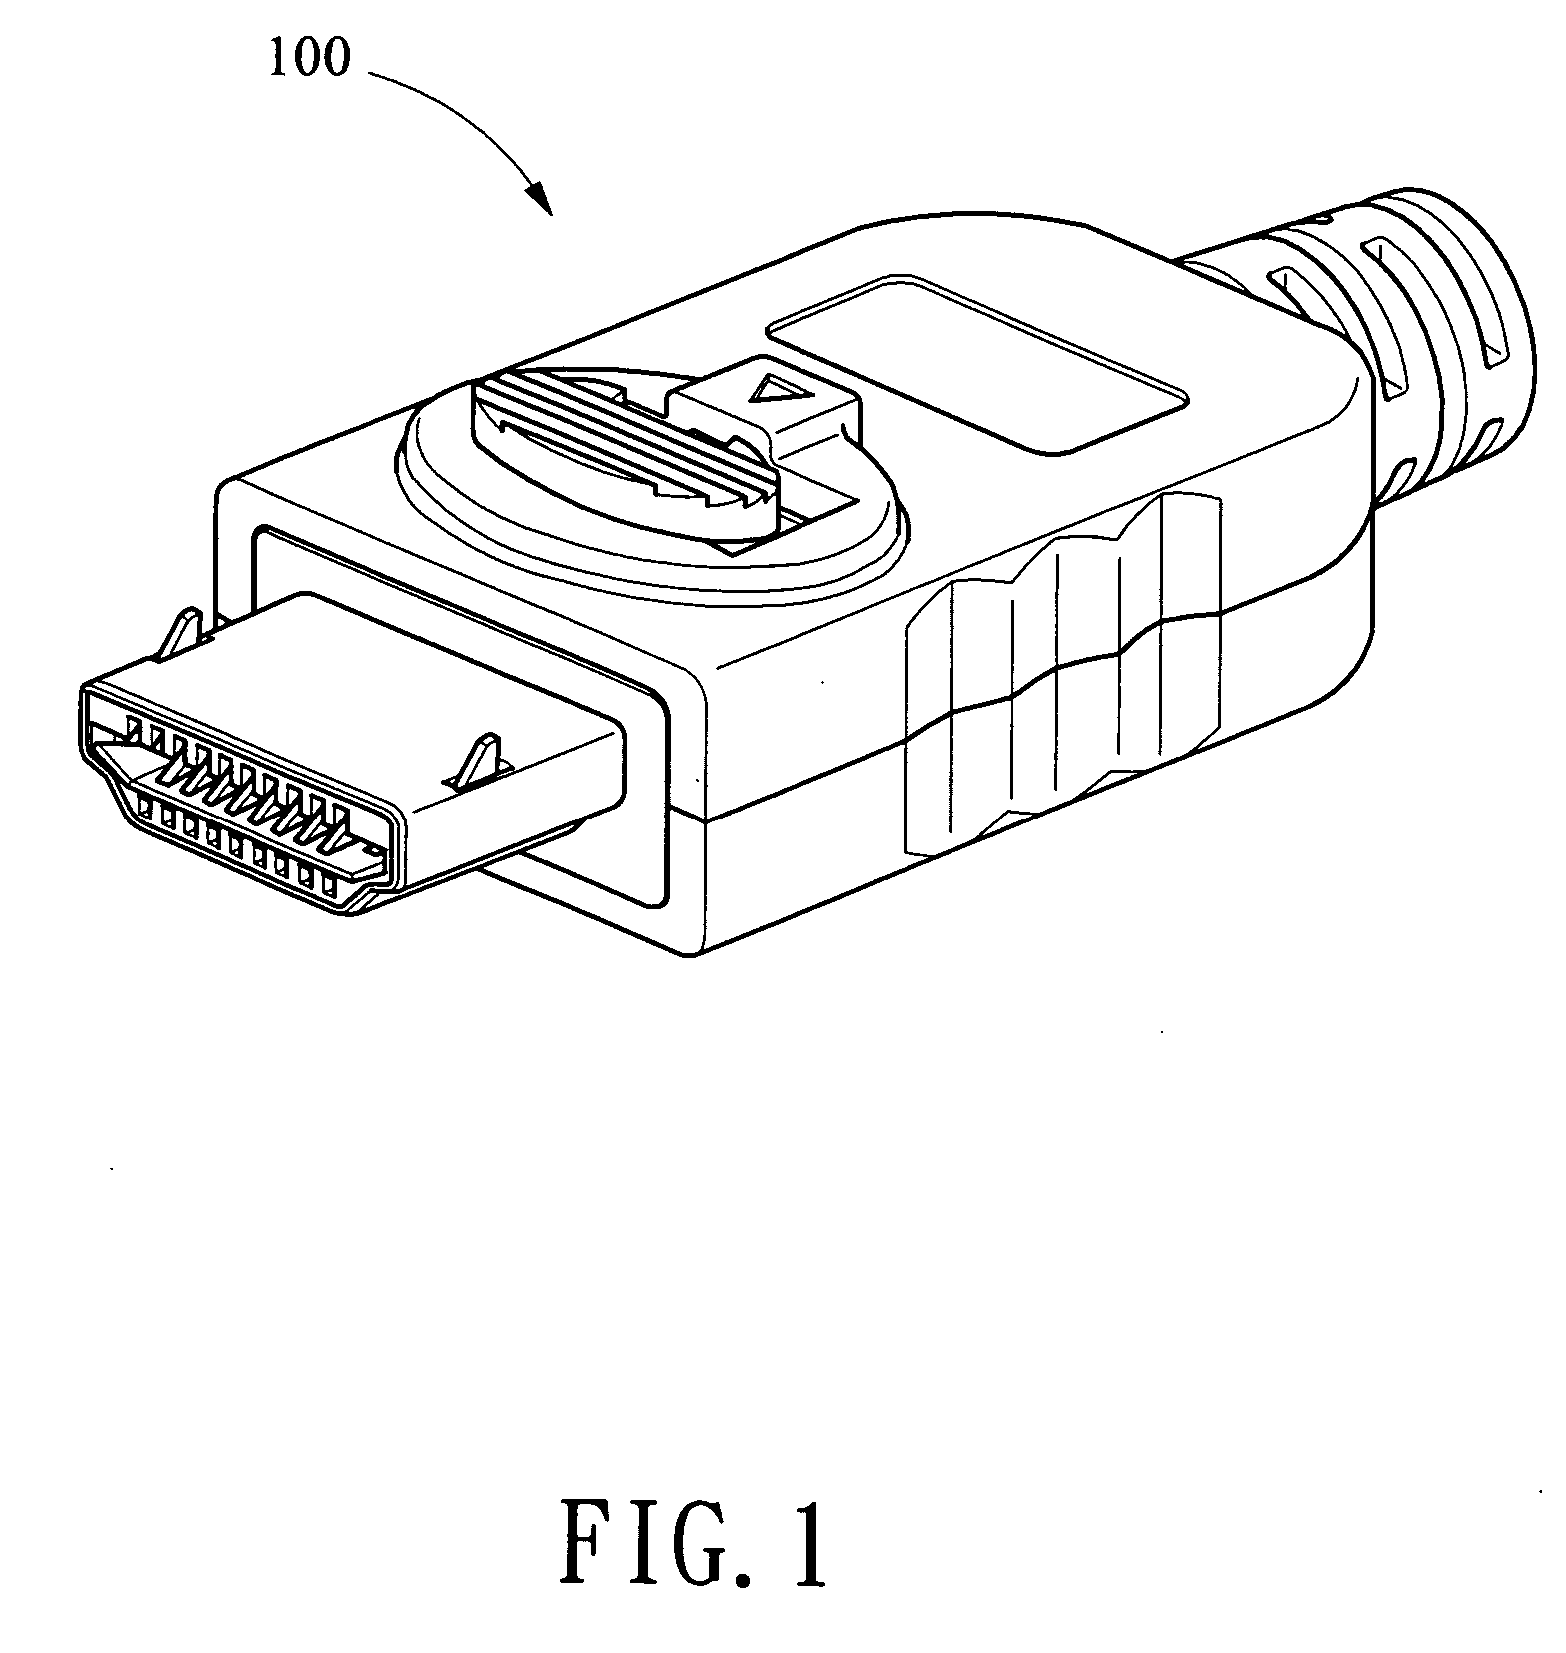 Electrical connector with a spring push button for disengagement with jack